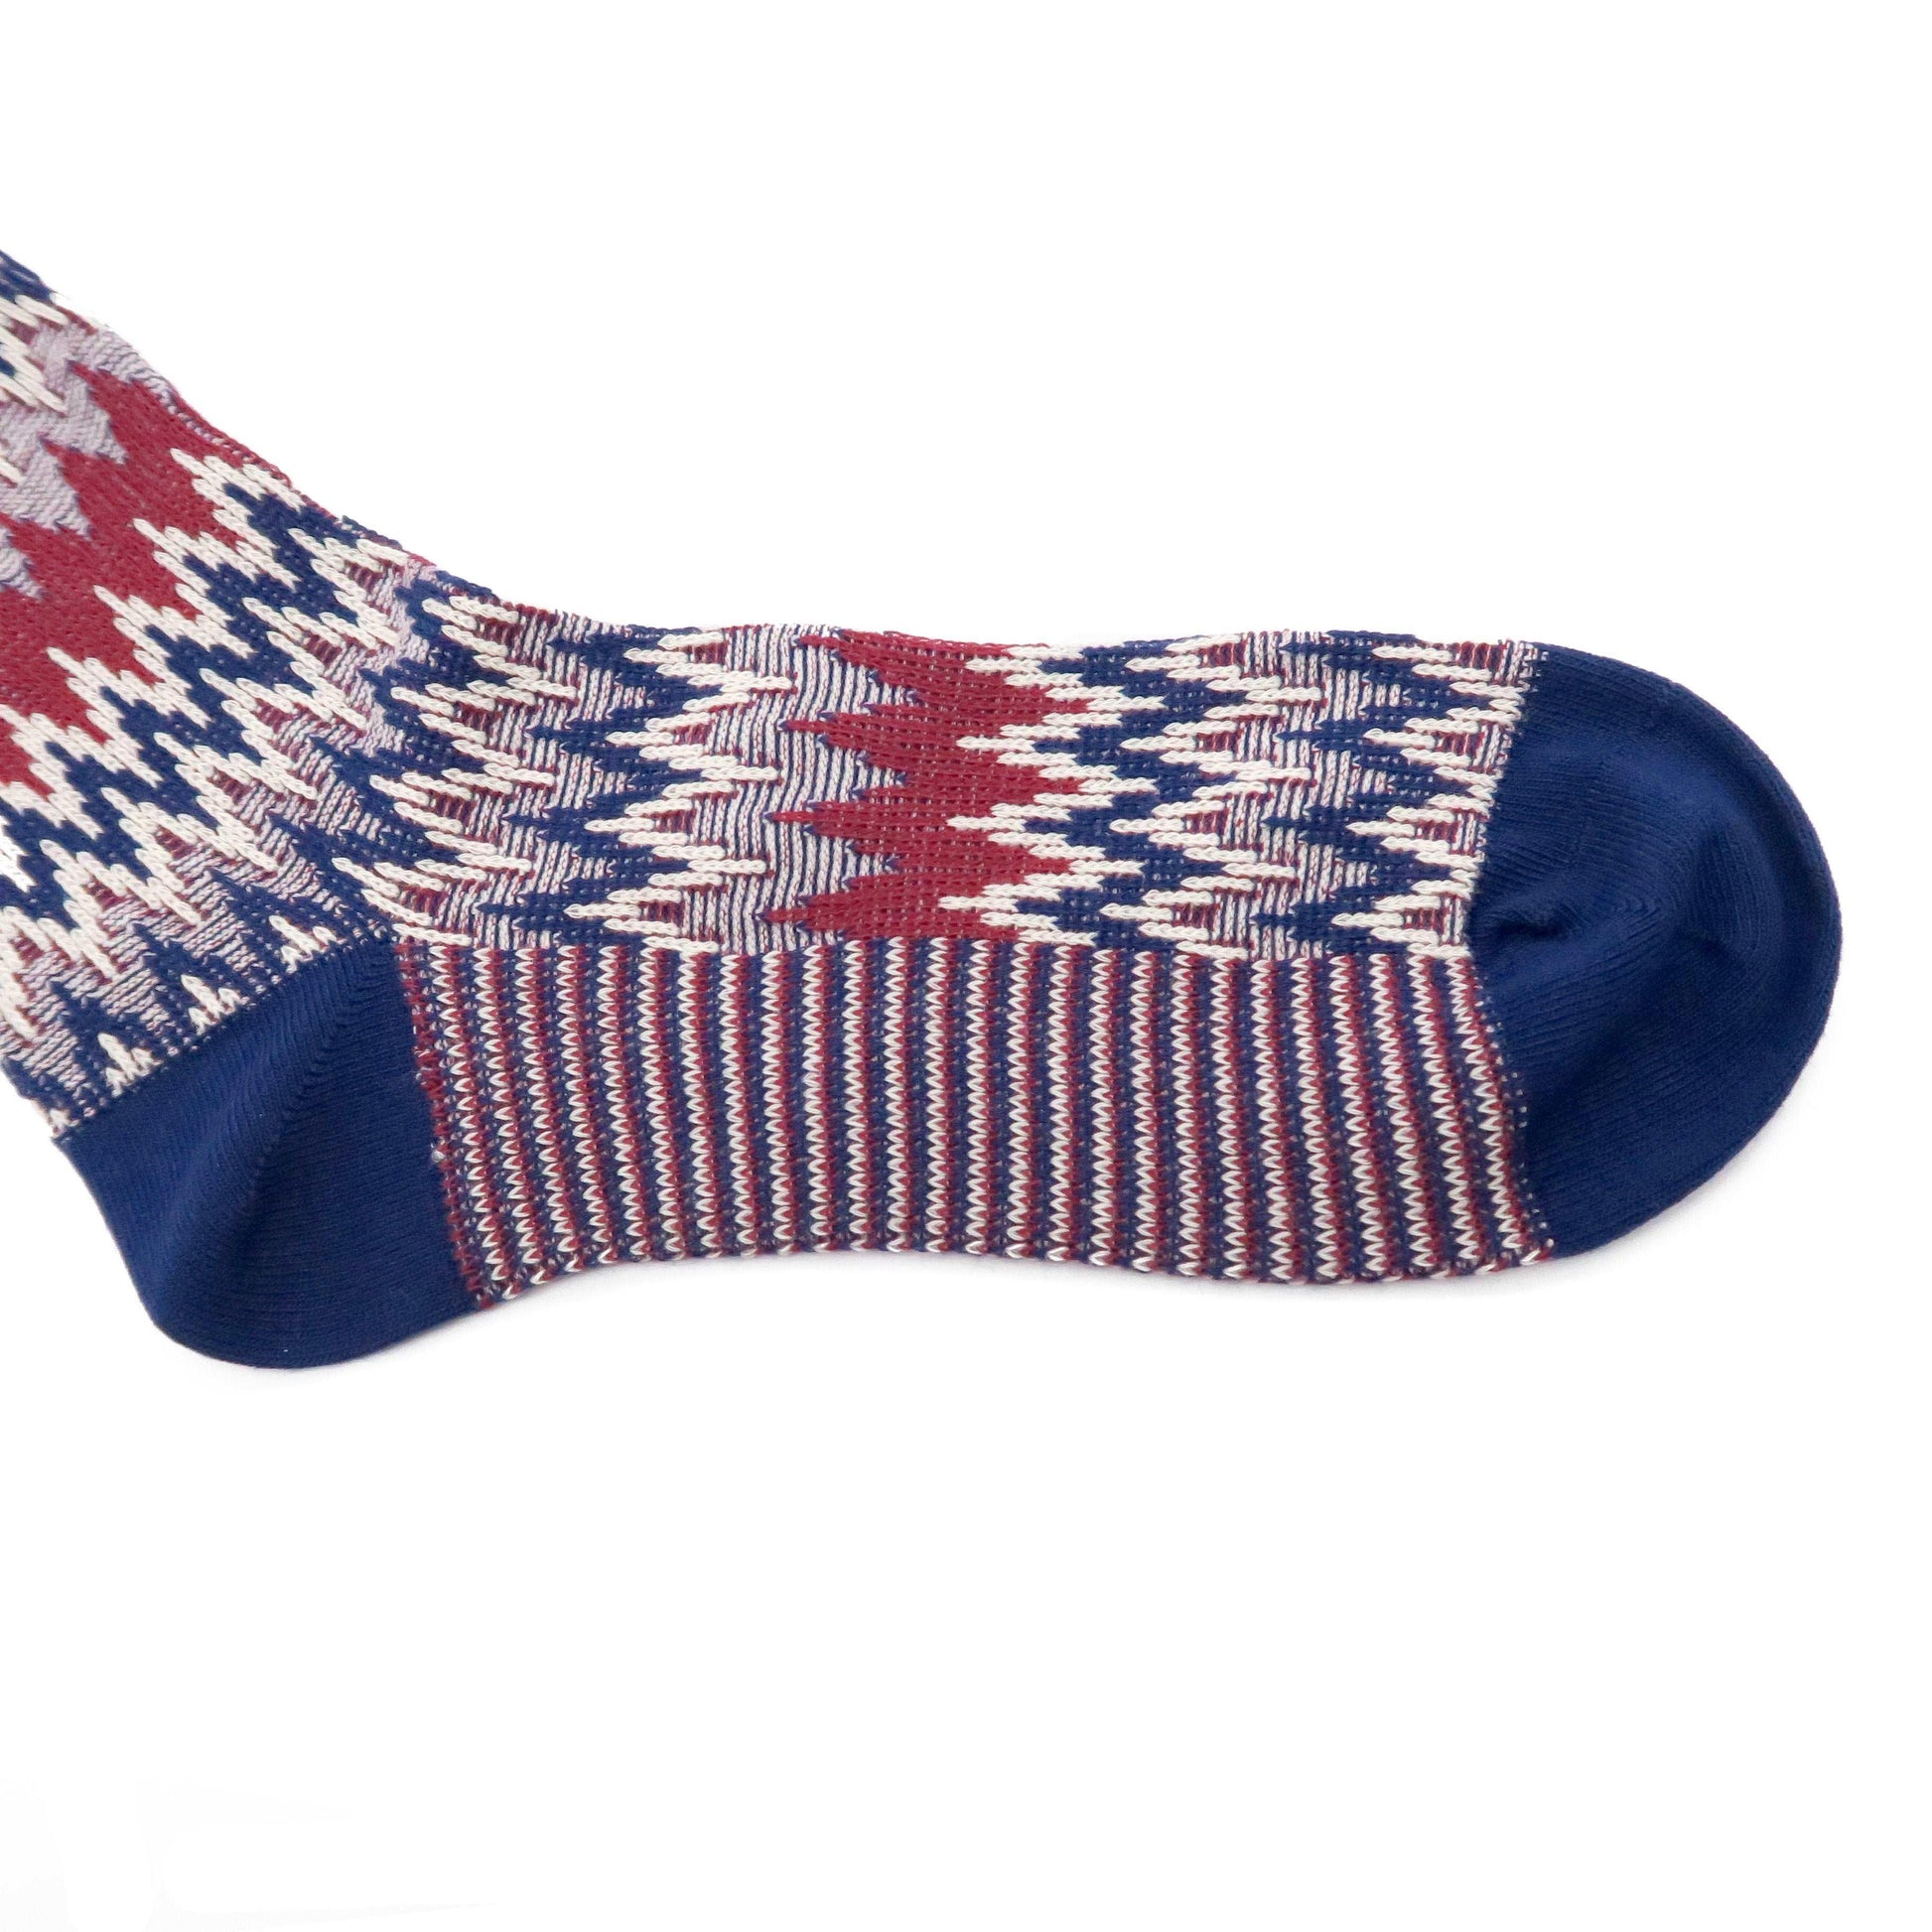 funky zig zag socks with navy and red color